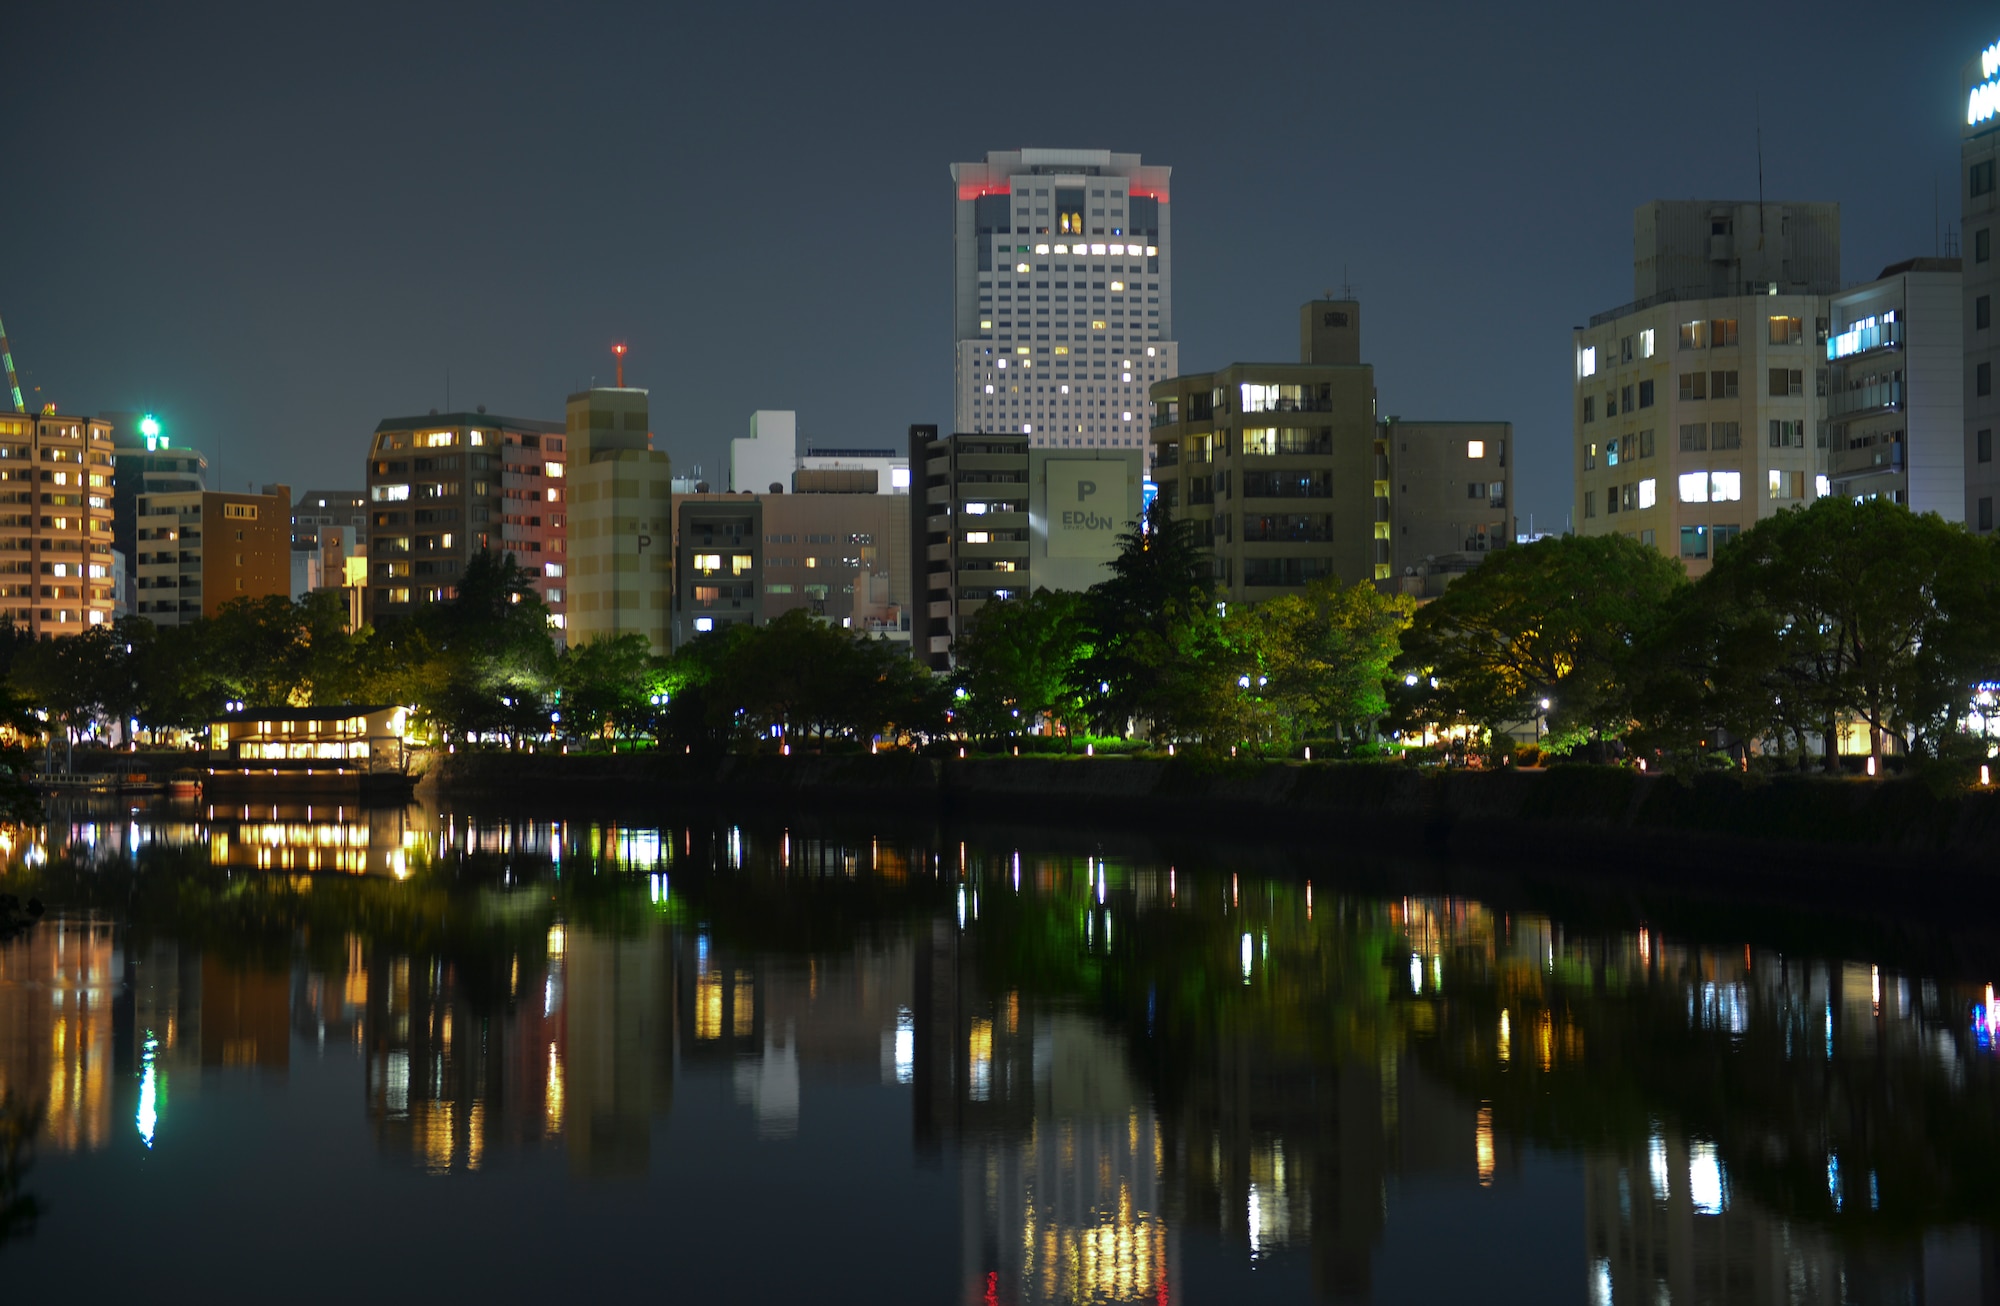 Lights from the skyline reflect in a river at Hiroshima, Japan, May 31, 2016. Hiroshima’s population has swelled more than three times in the 71 years since WWII. (U.S. Air Force photo by Airman 1st Class Elizabeth Baker/Released)